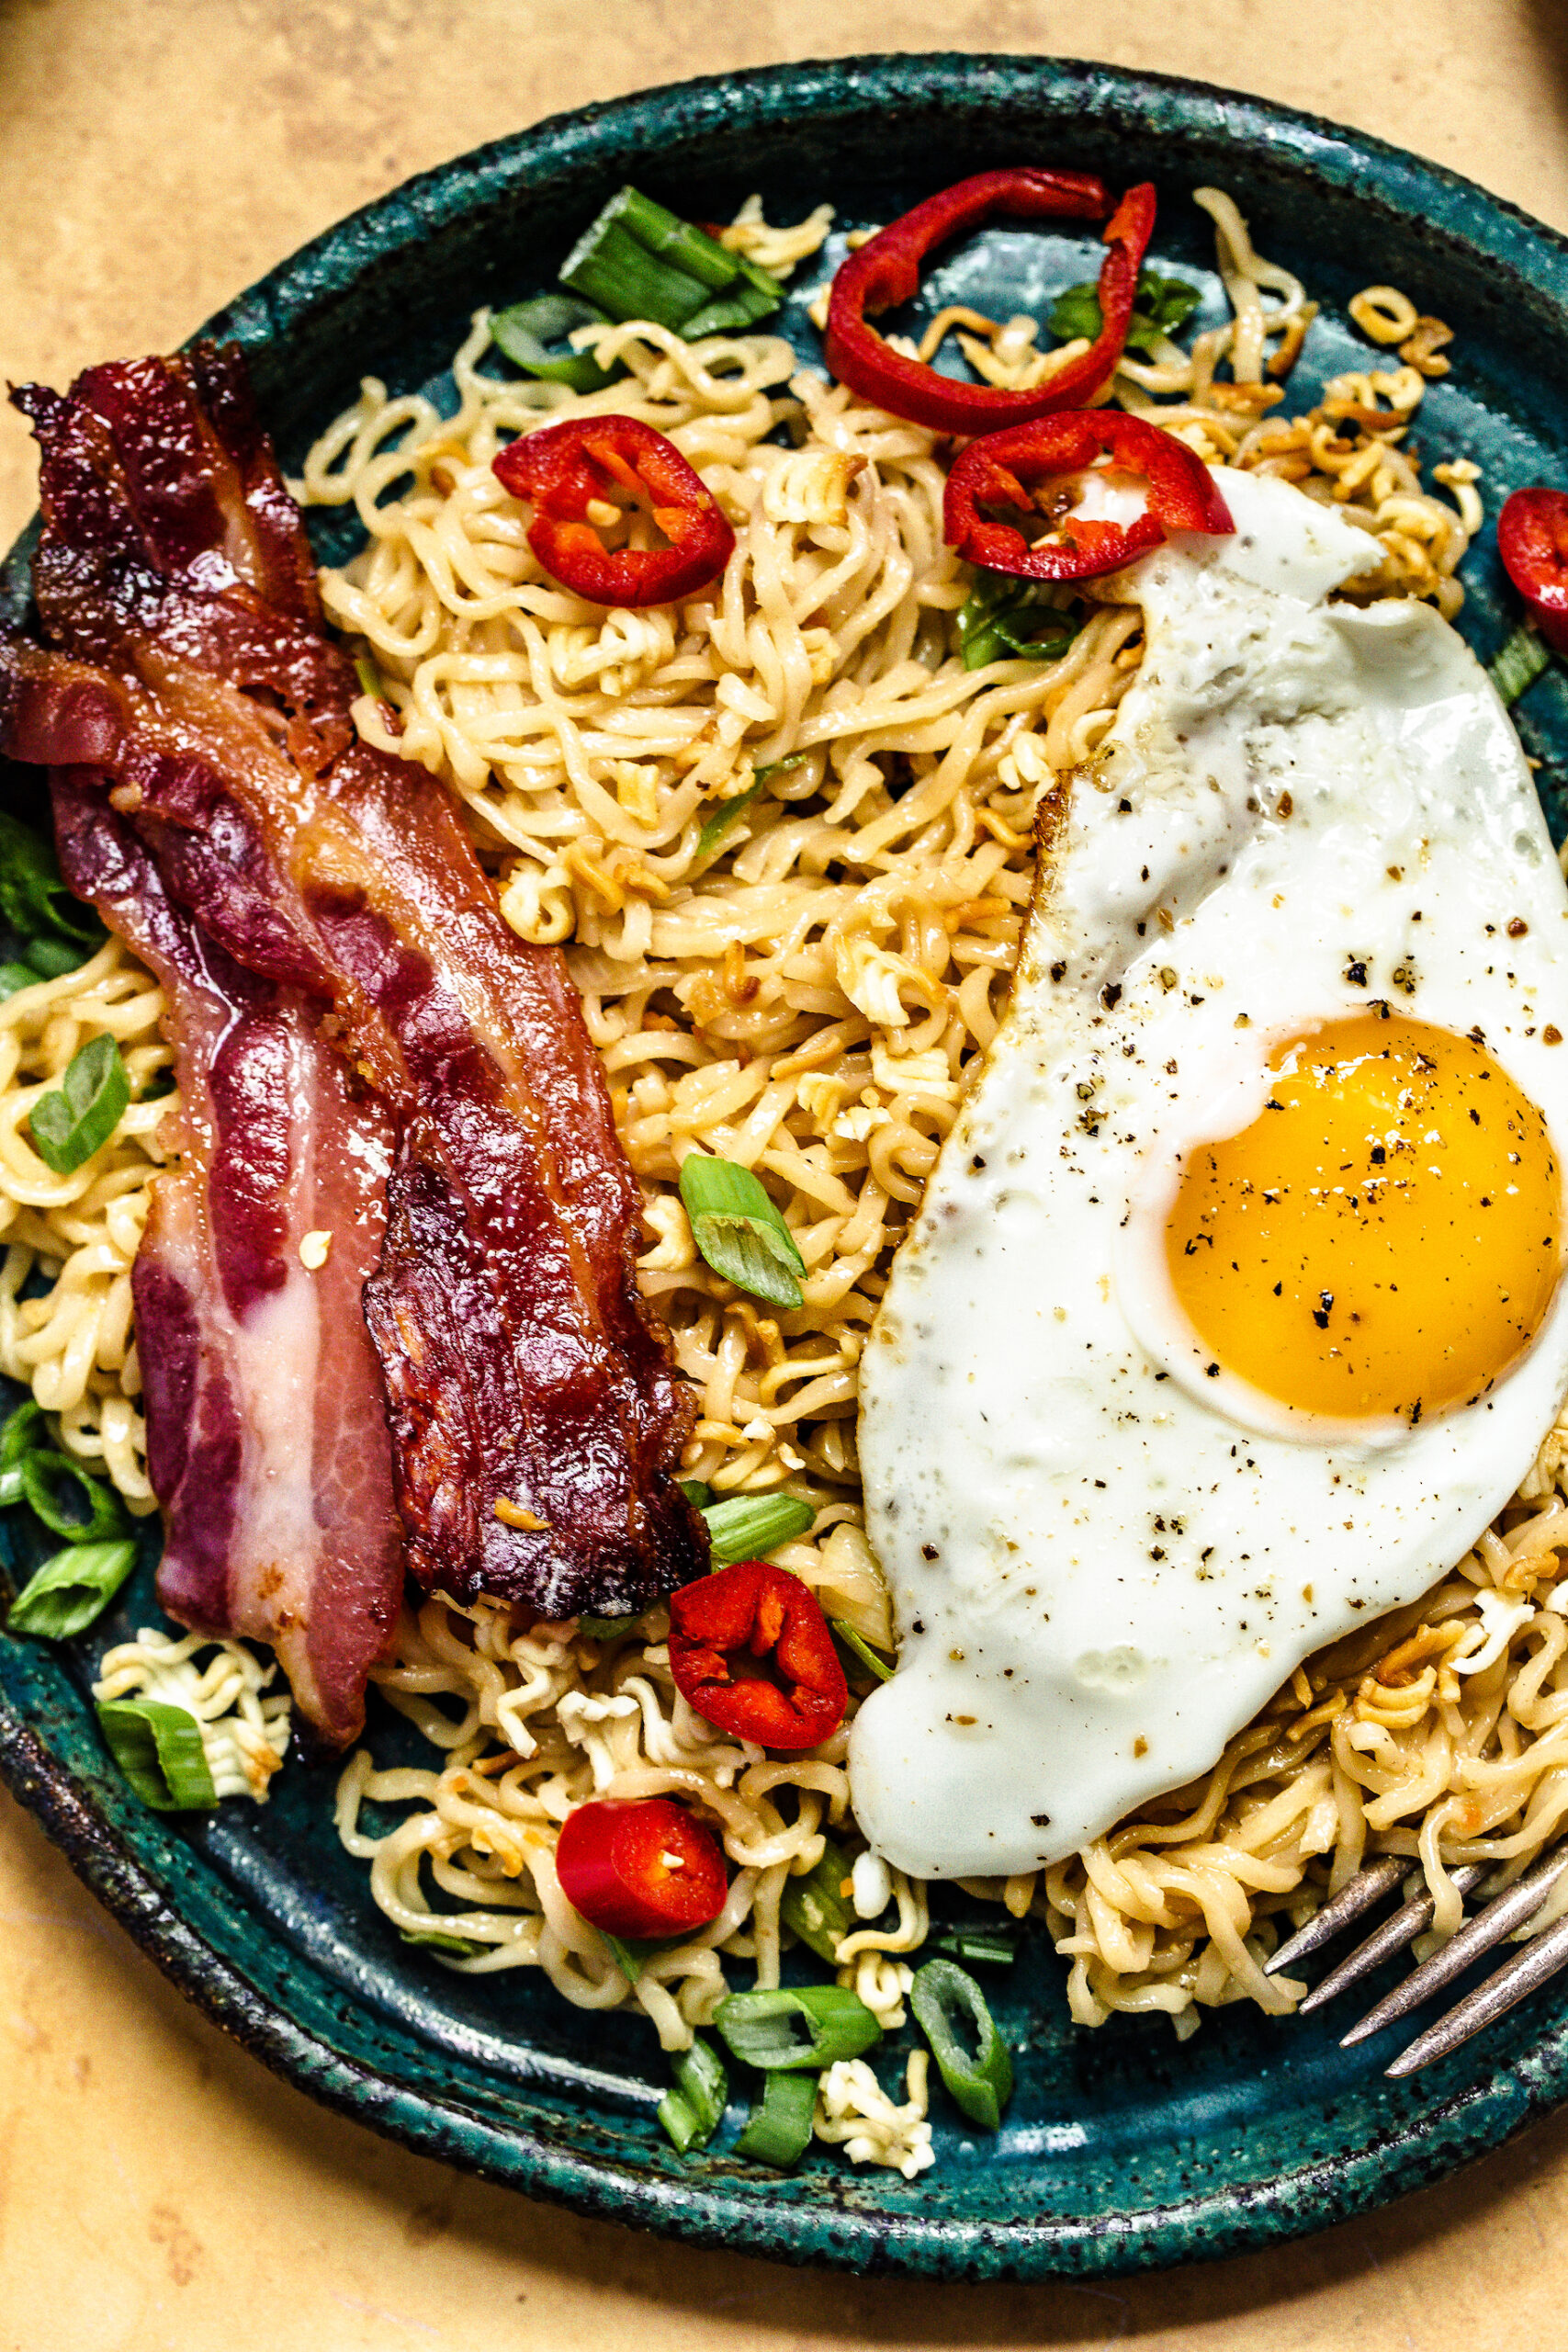 Ginger Miso Crunch Ramen with Candied Bacon and Eggs (Mazemen)